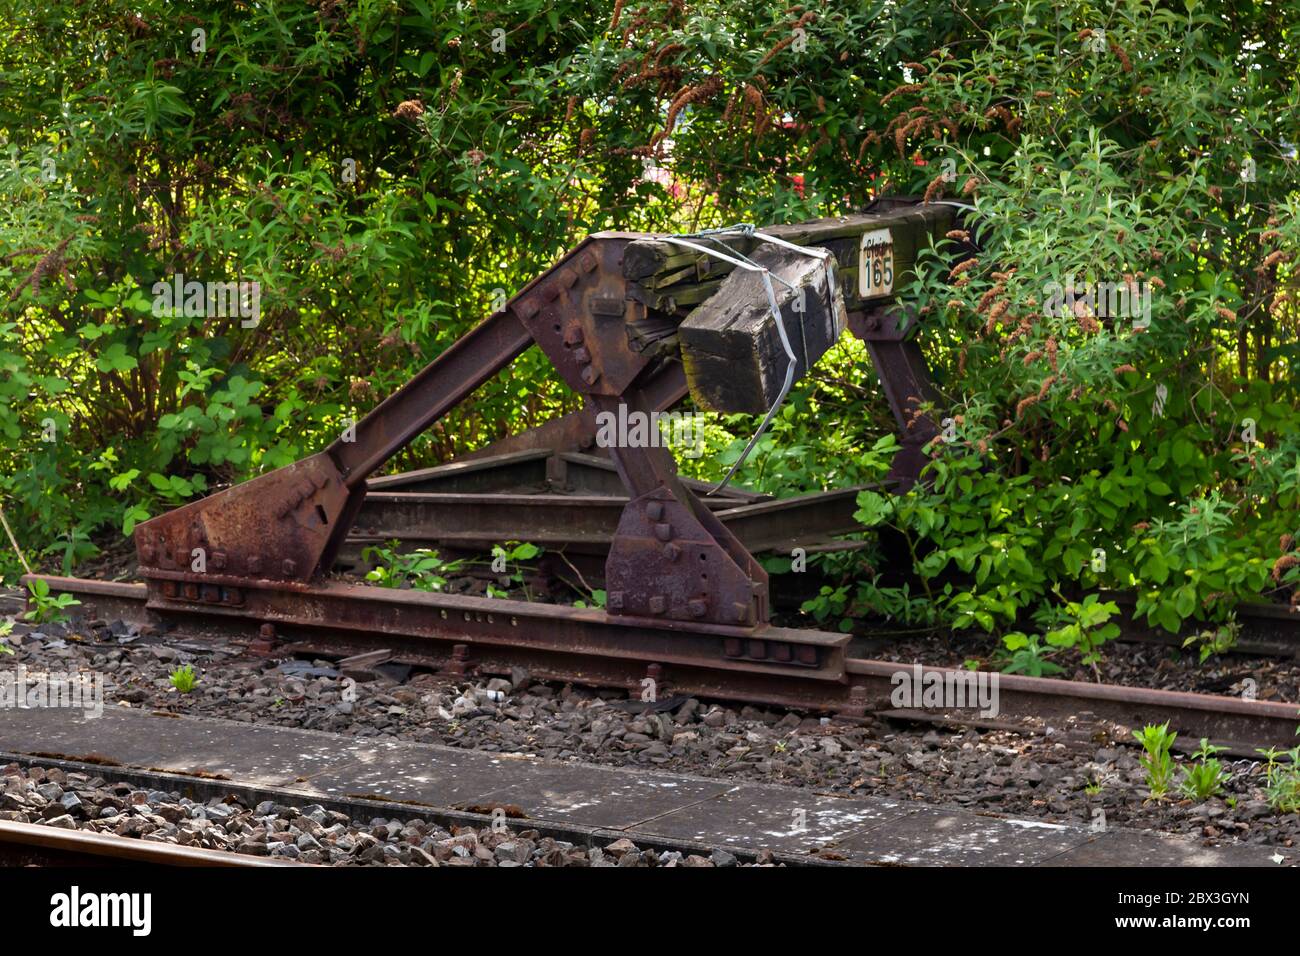 An overgrown buffer stop at the end of a track at the Train Station Grevenbroich, Germany Stock Photo